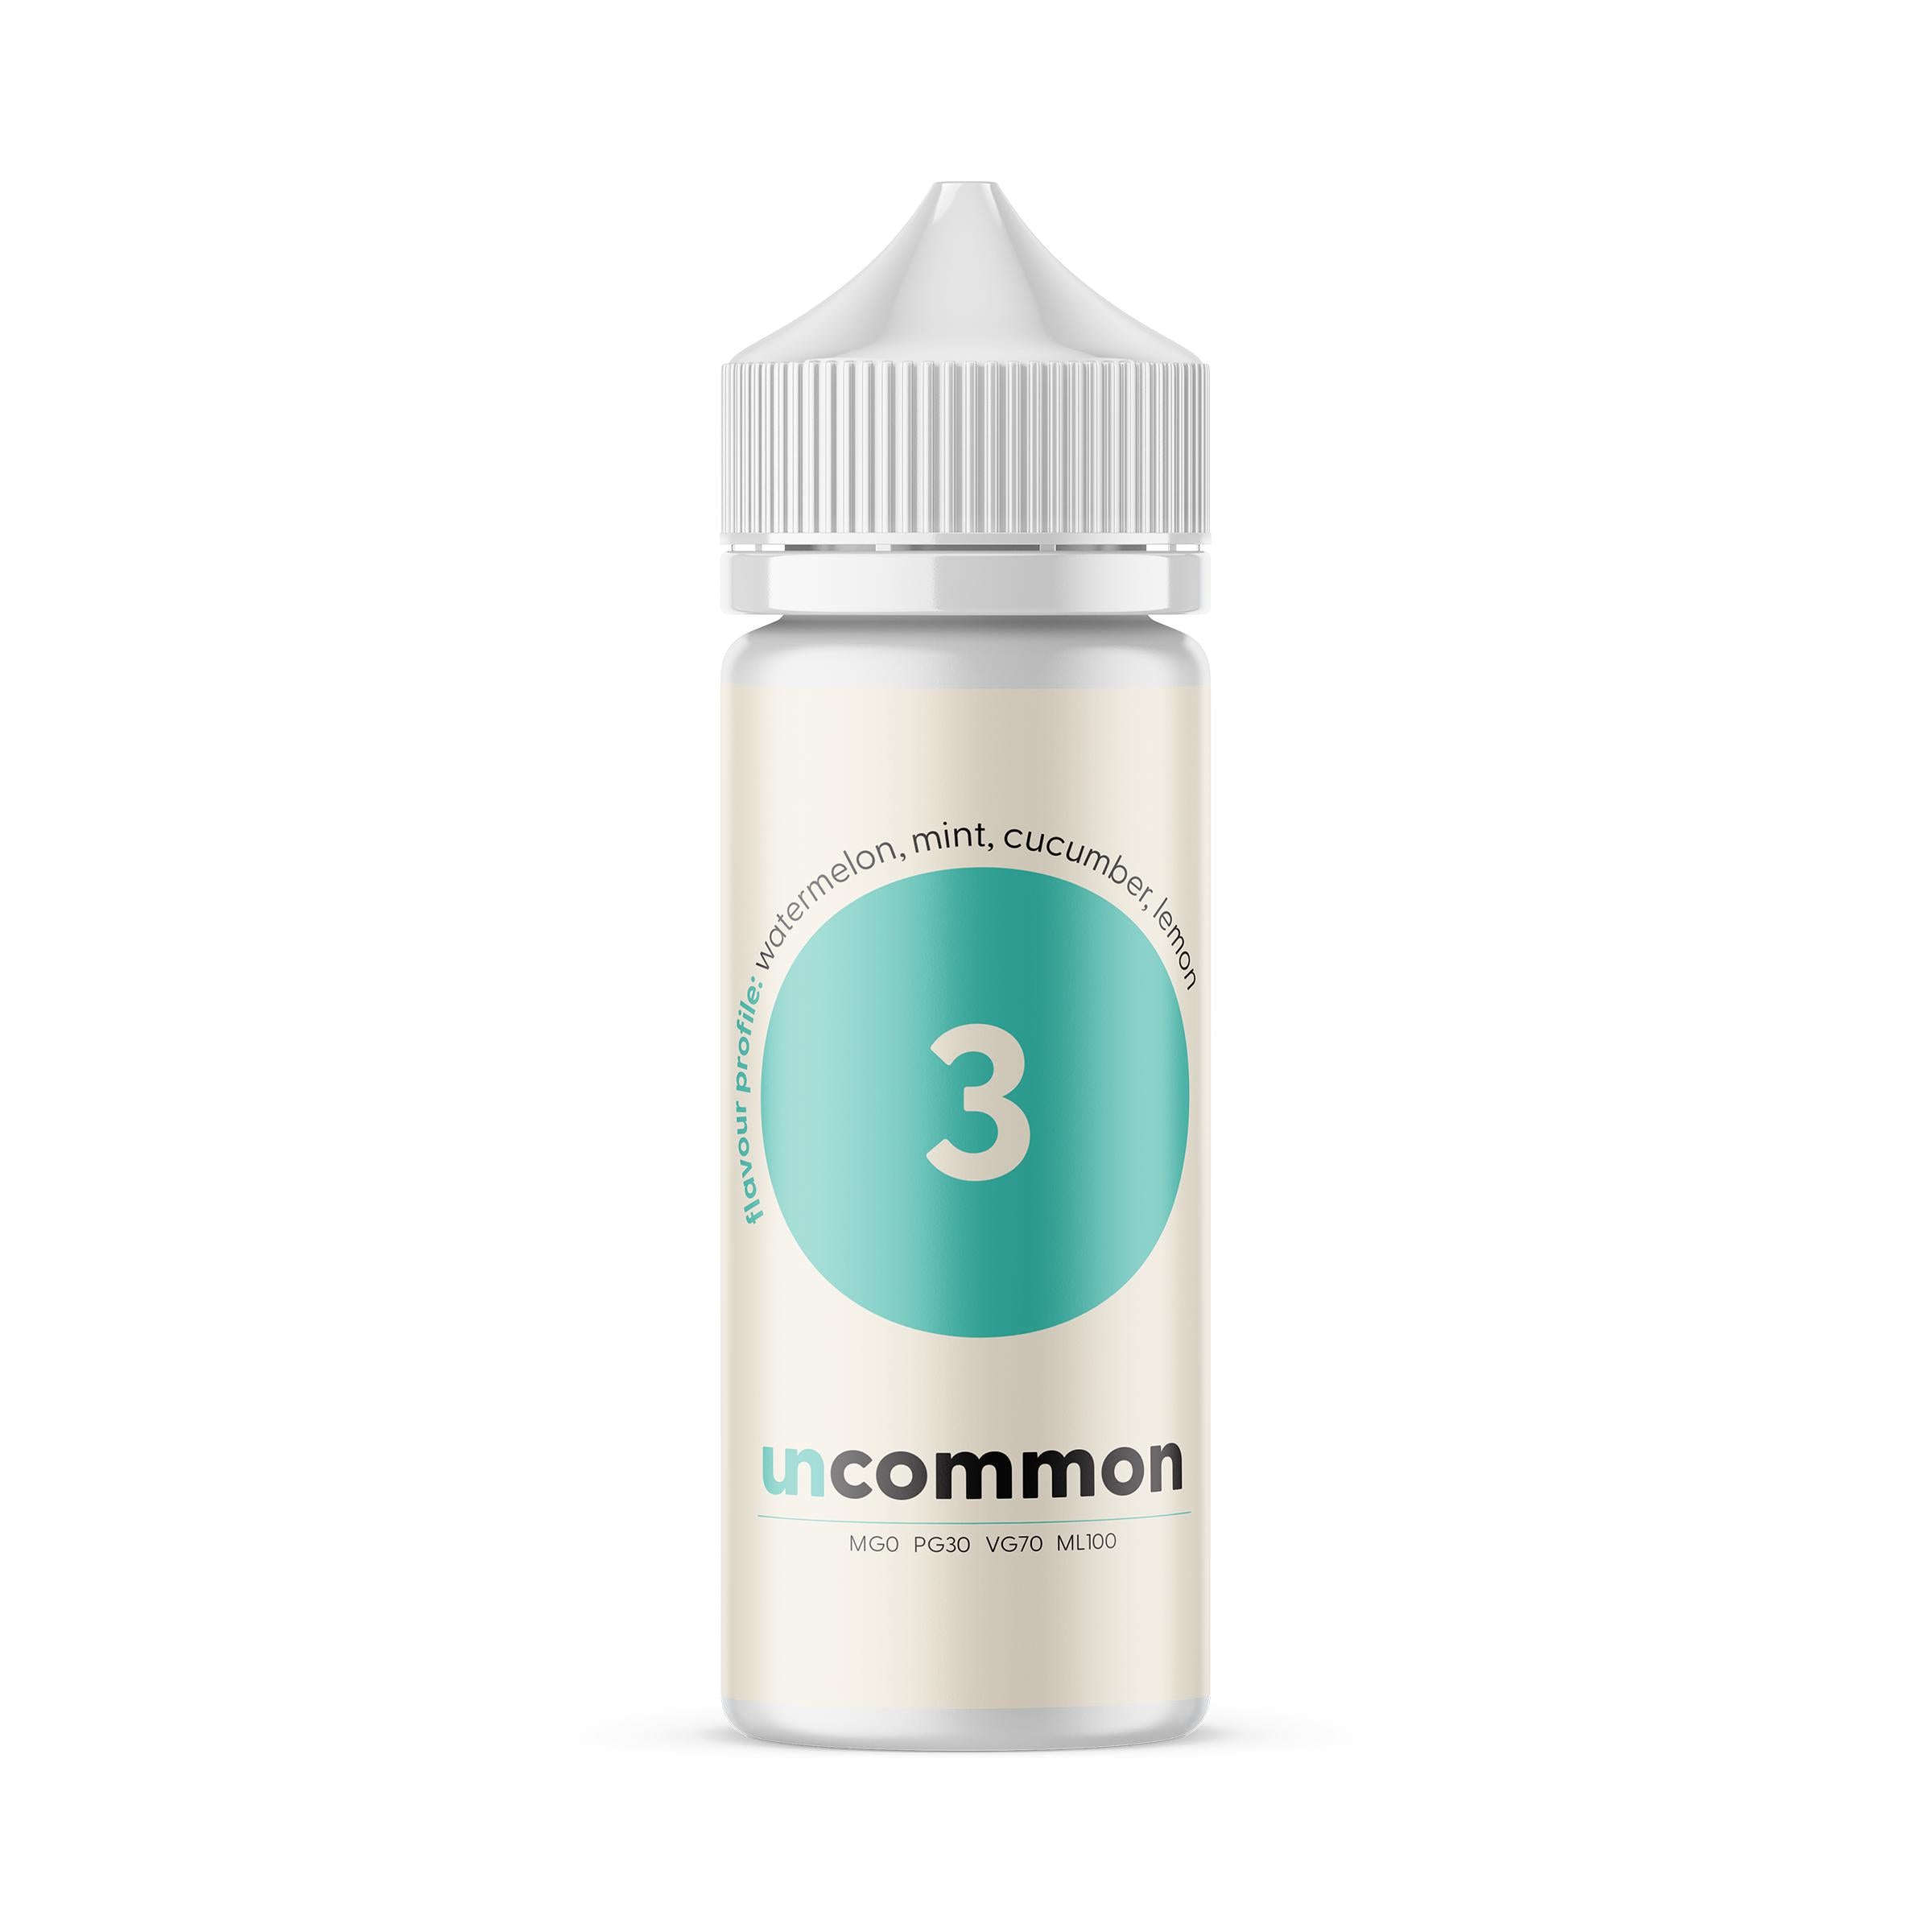 uncommon 3 by Supergood x Grimm Green - 100ml-Supergood.